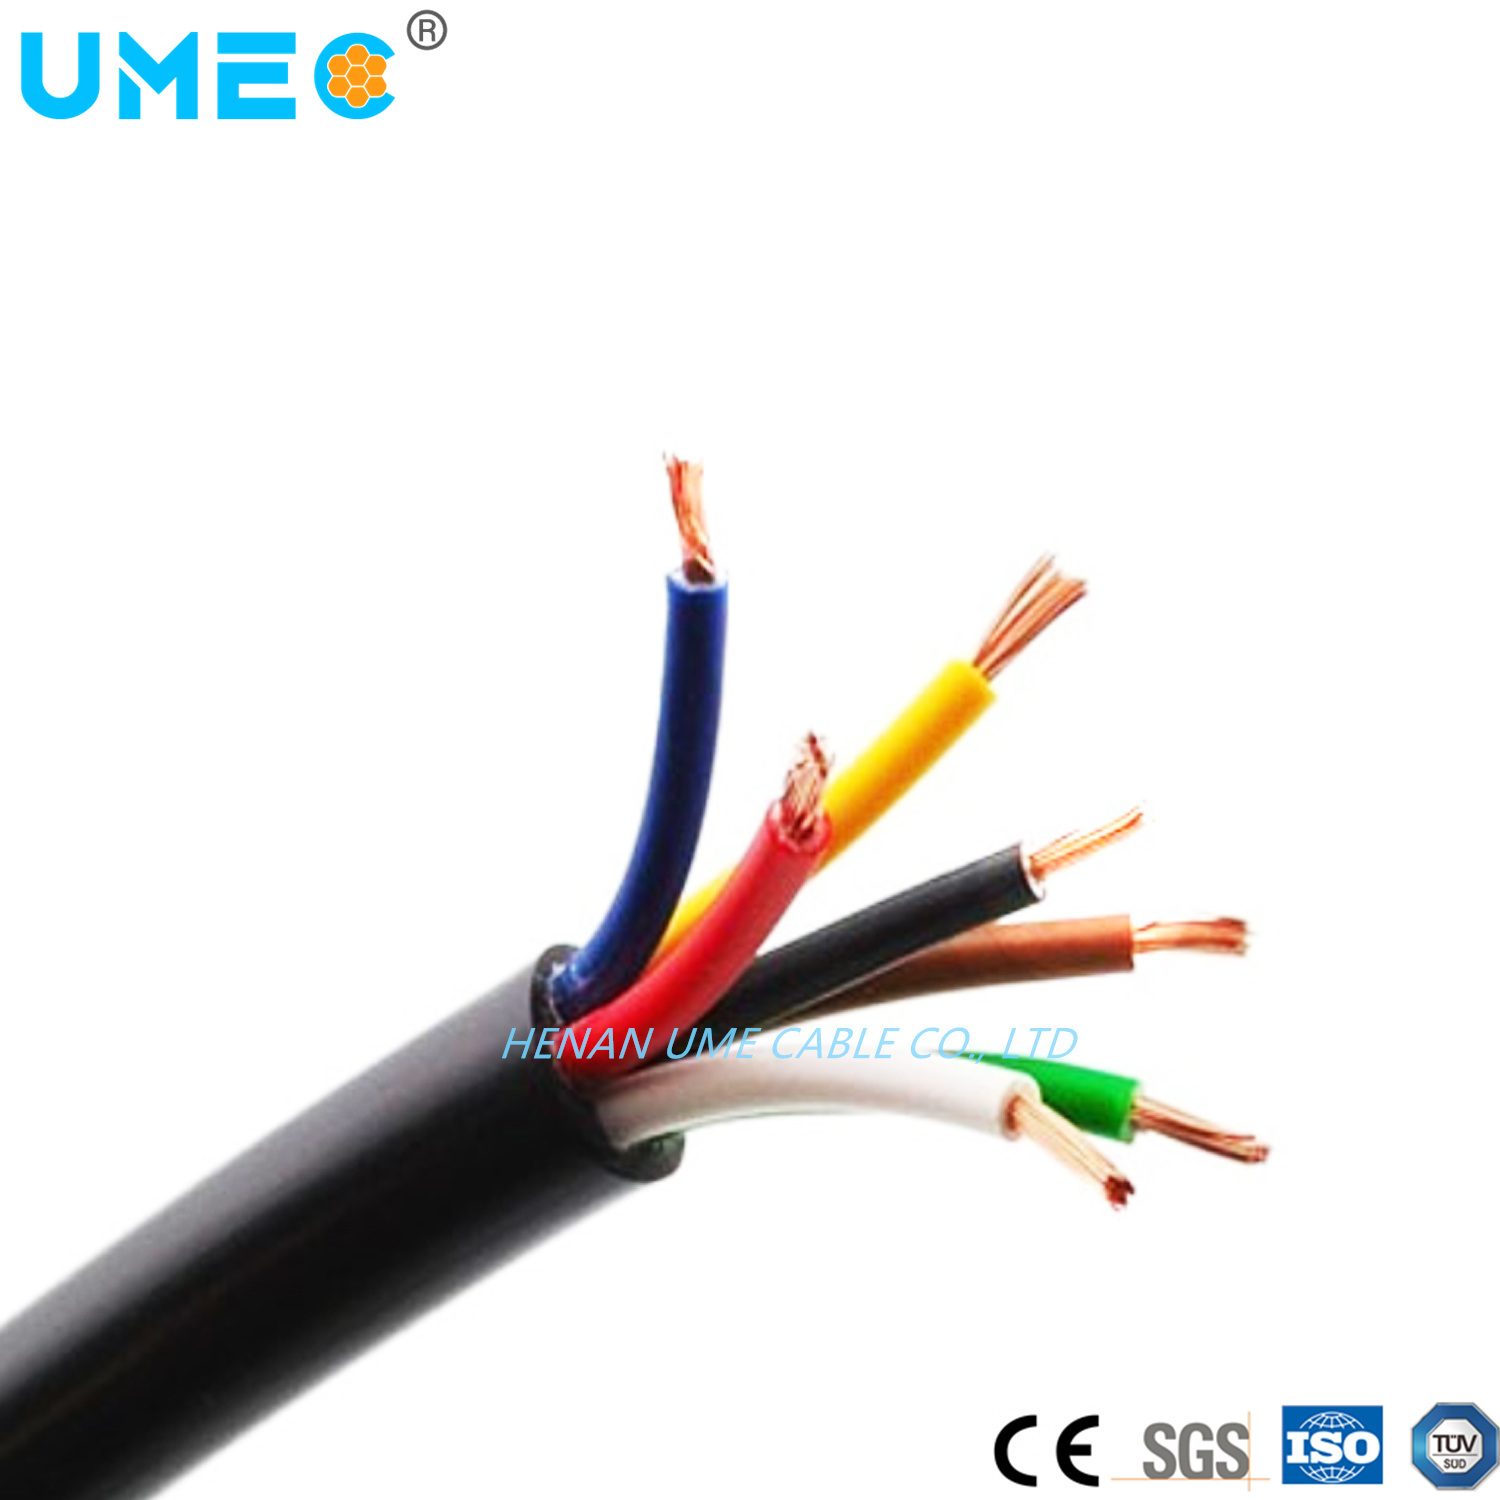 European CE Certification Rubber Elastomer Compound Cable 6mm2 10mm2 16mm2 H05bb-F H07bb-F Cable